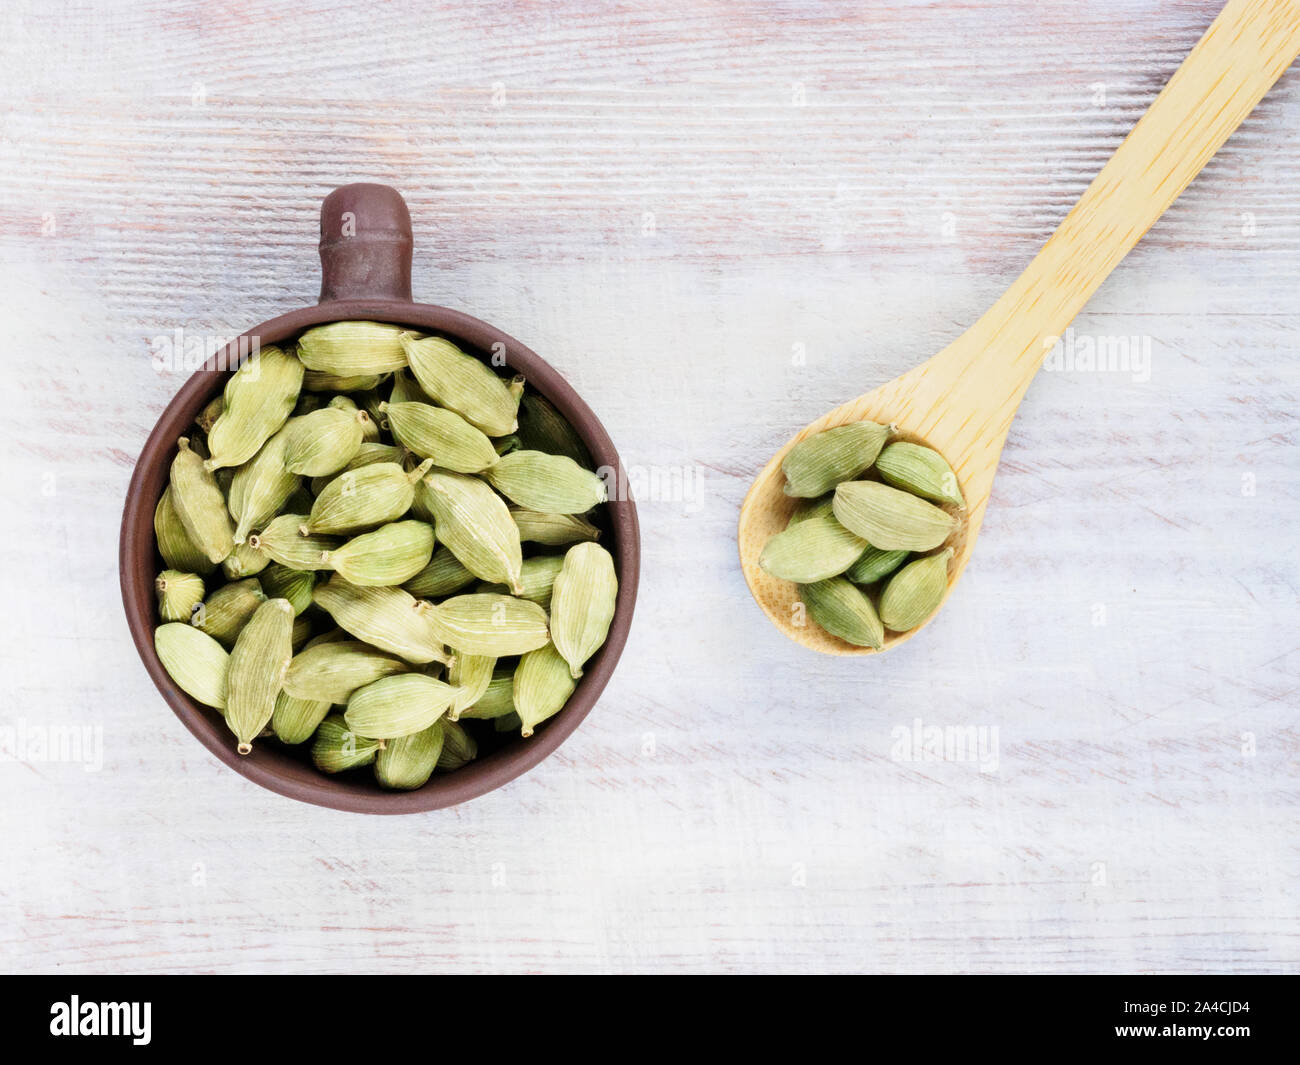 Spice Green cardamom (Elettaria cardamomum) in a clay cup with a spoon on a brown wooden background Stock Photo